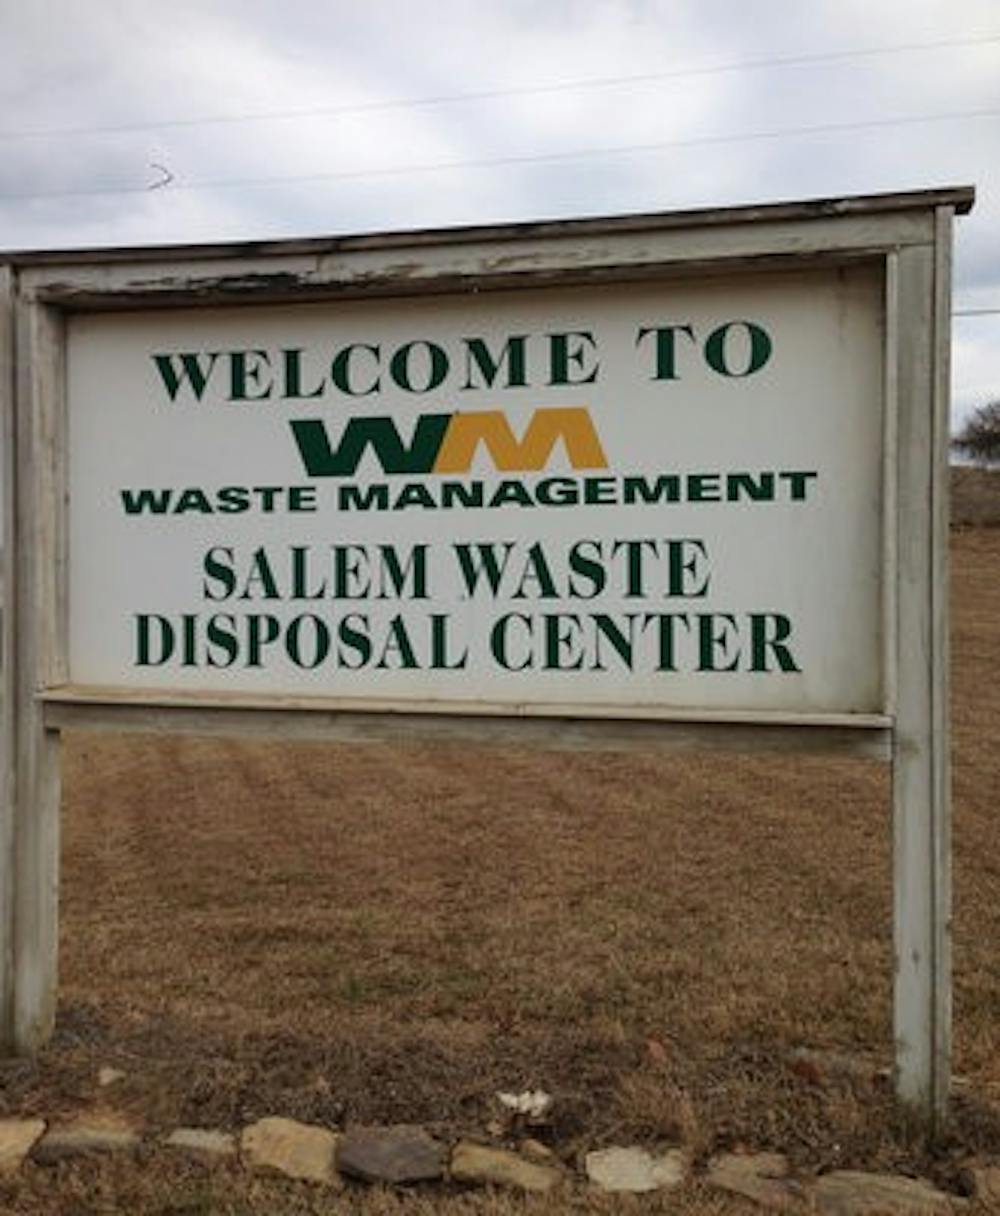 All of Auburn's non-recycled waste goes straight to Waste Management's Salem Waste Disposal Center. (Photo by: Pierce Ostwalt)